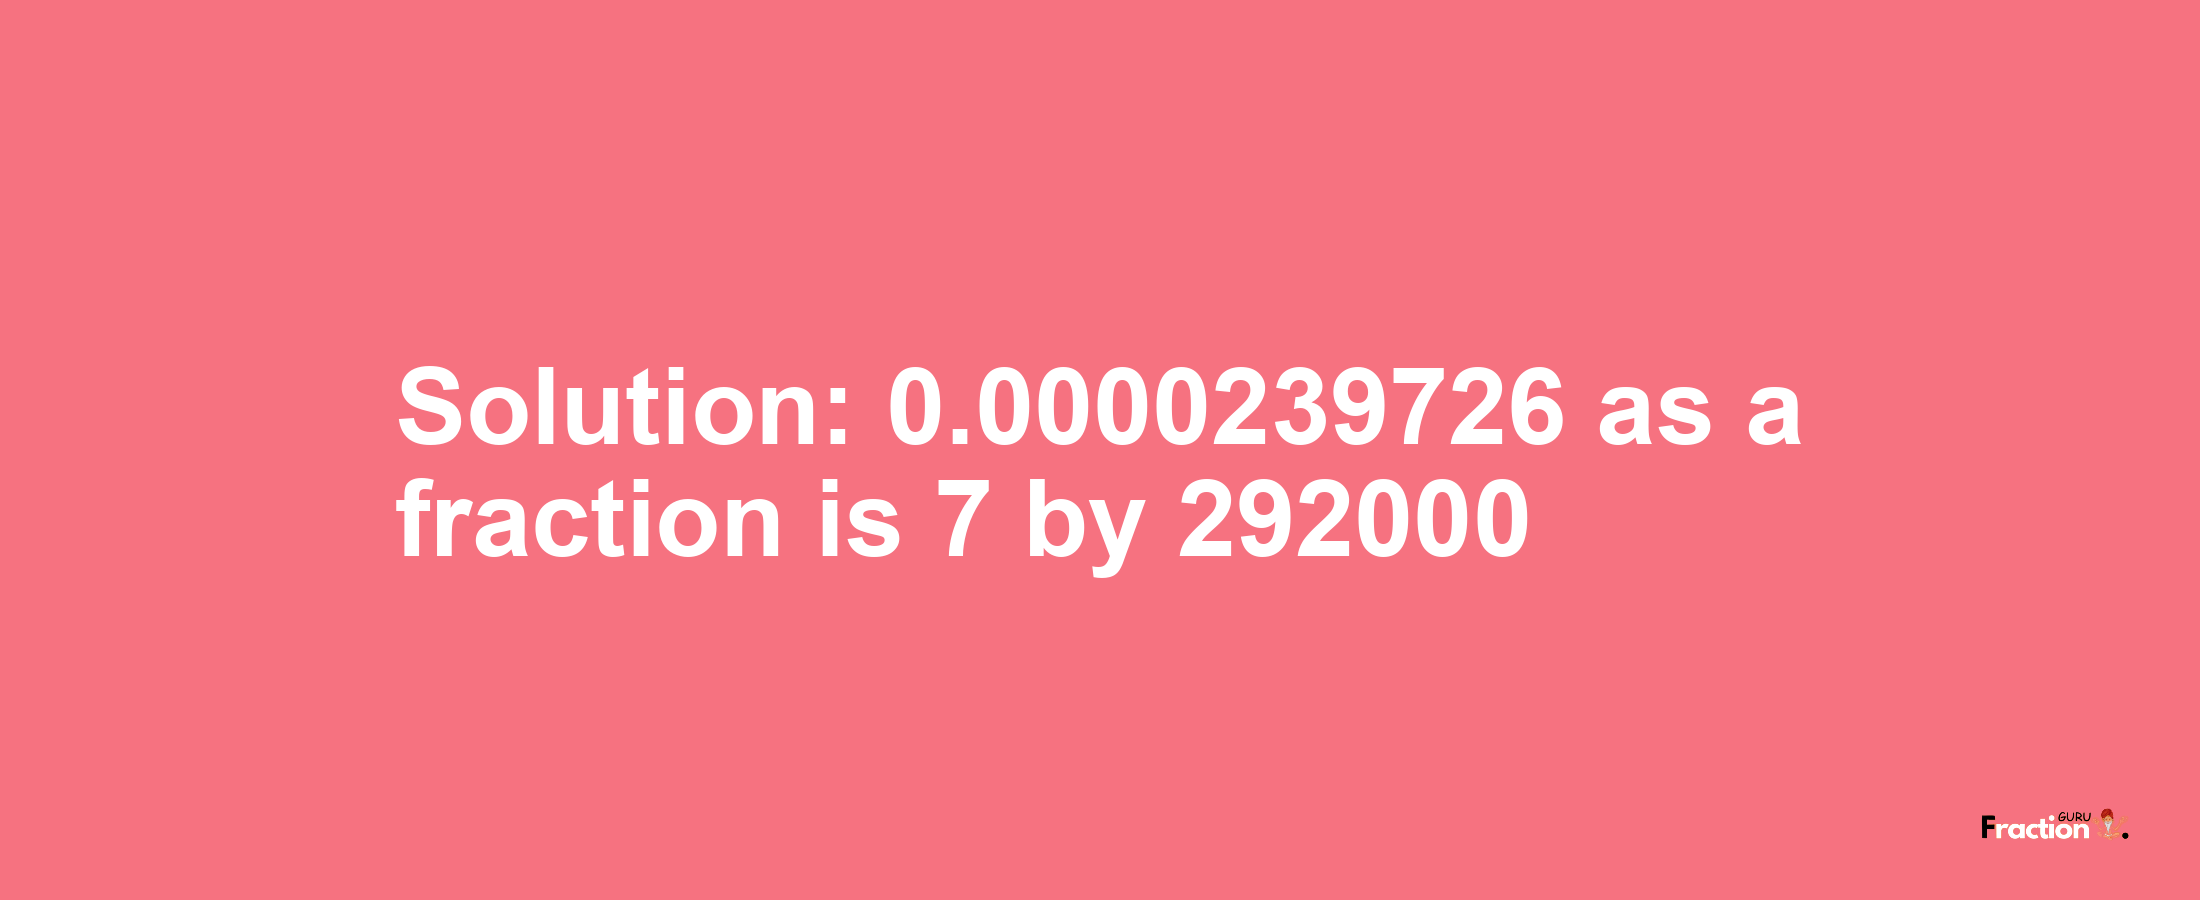 Solution:0.0000239726 as a fraction is 7/292000